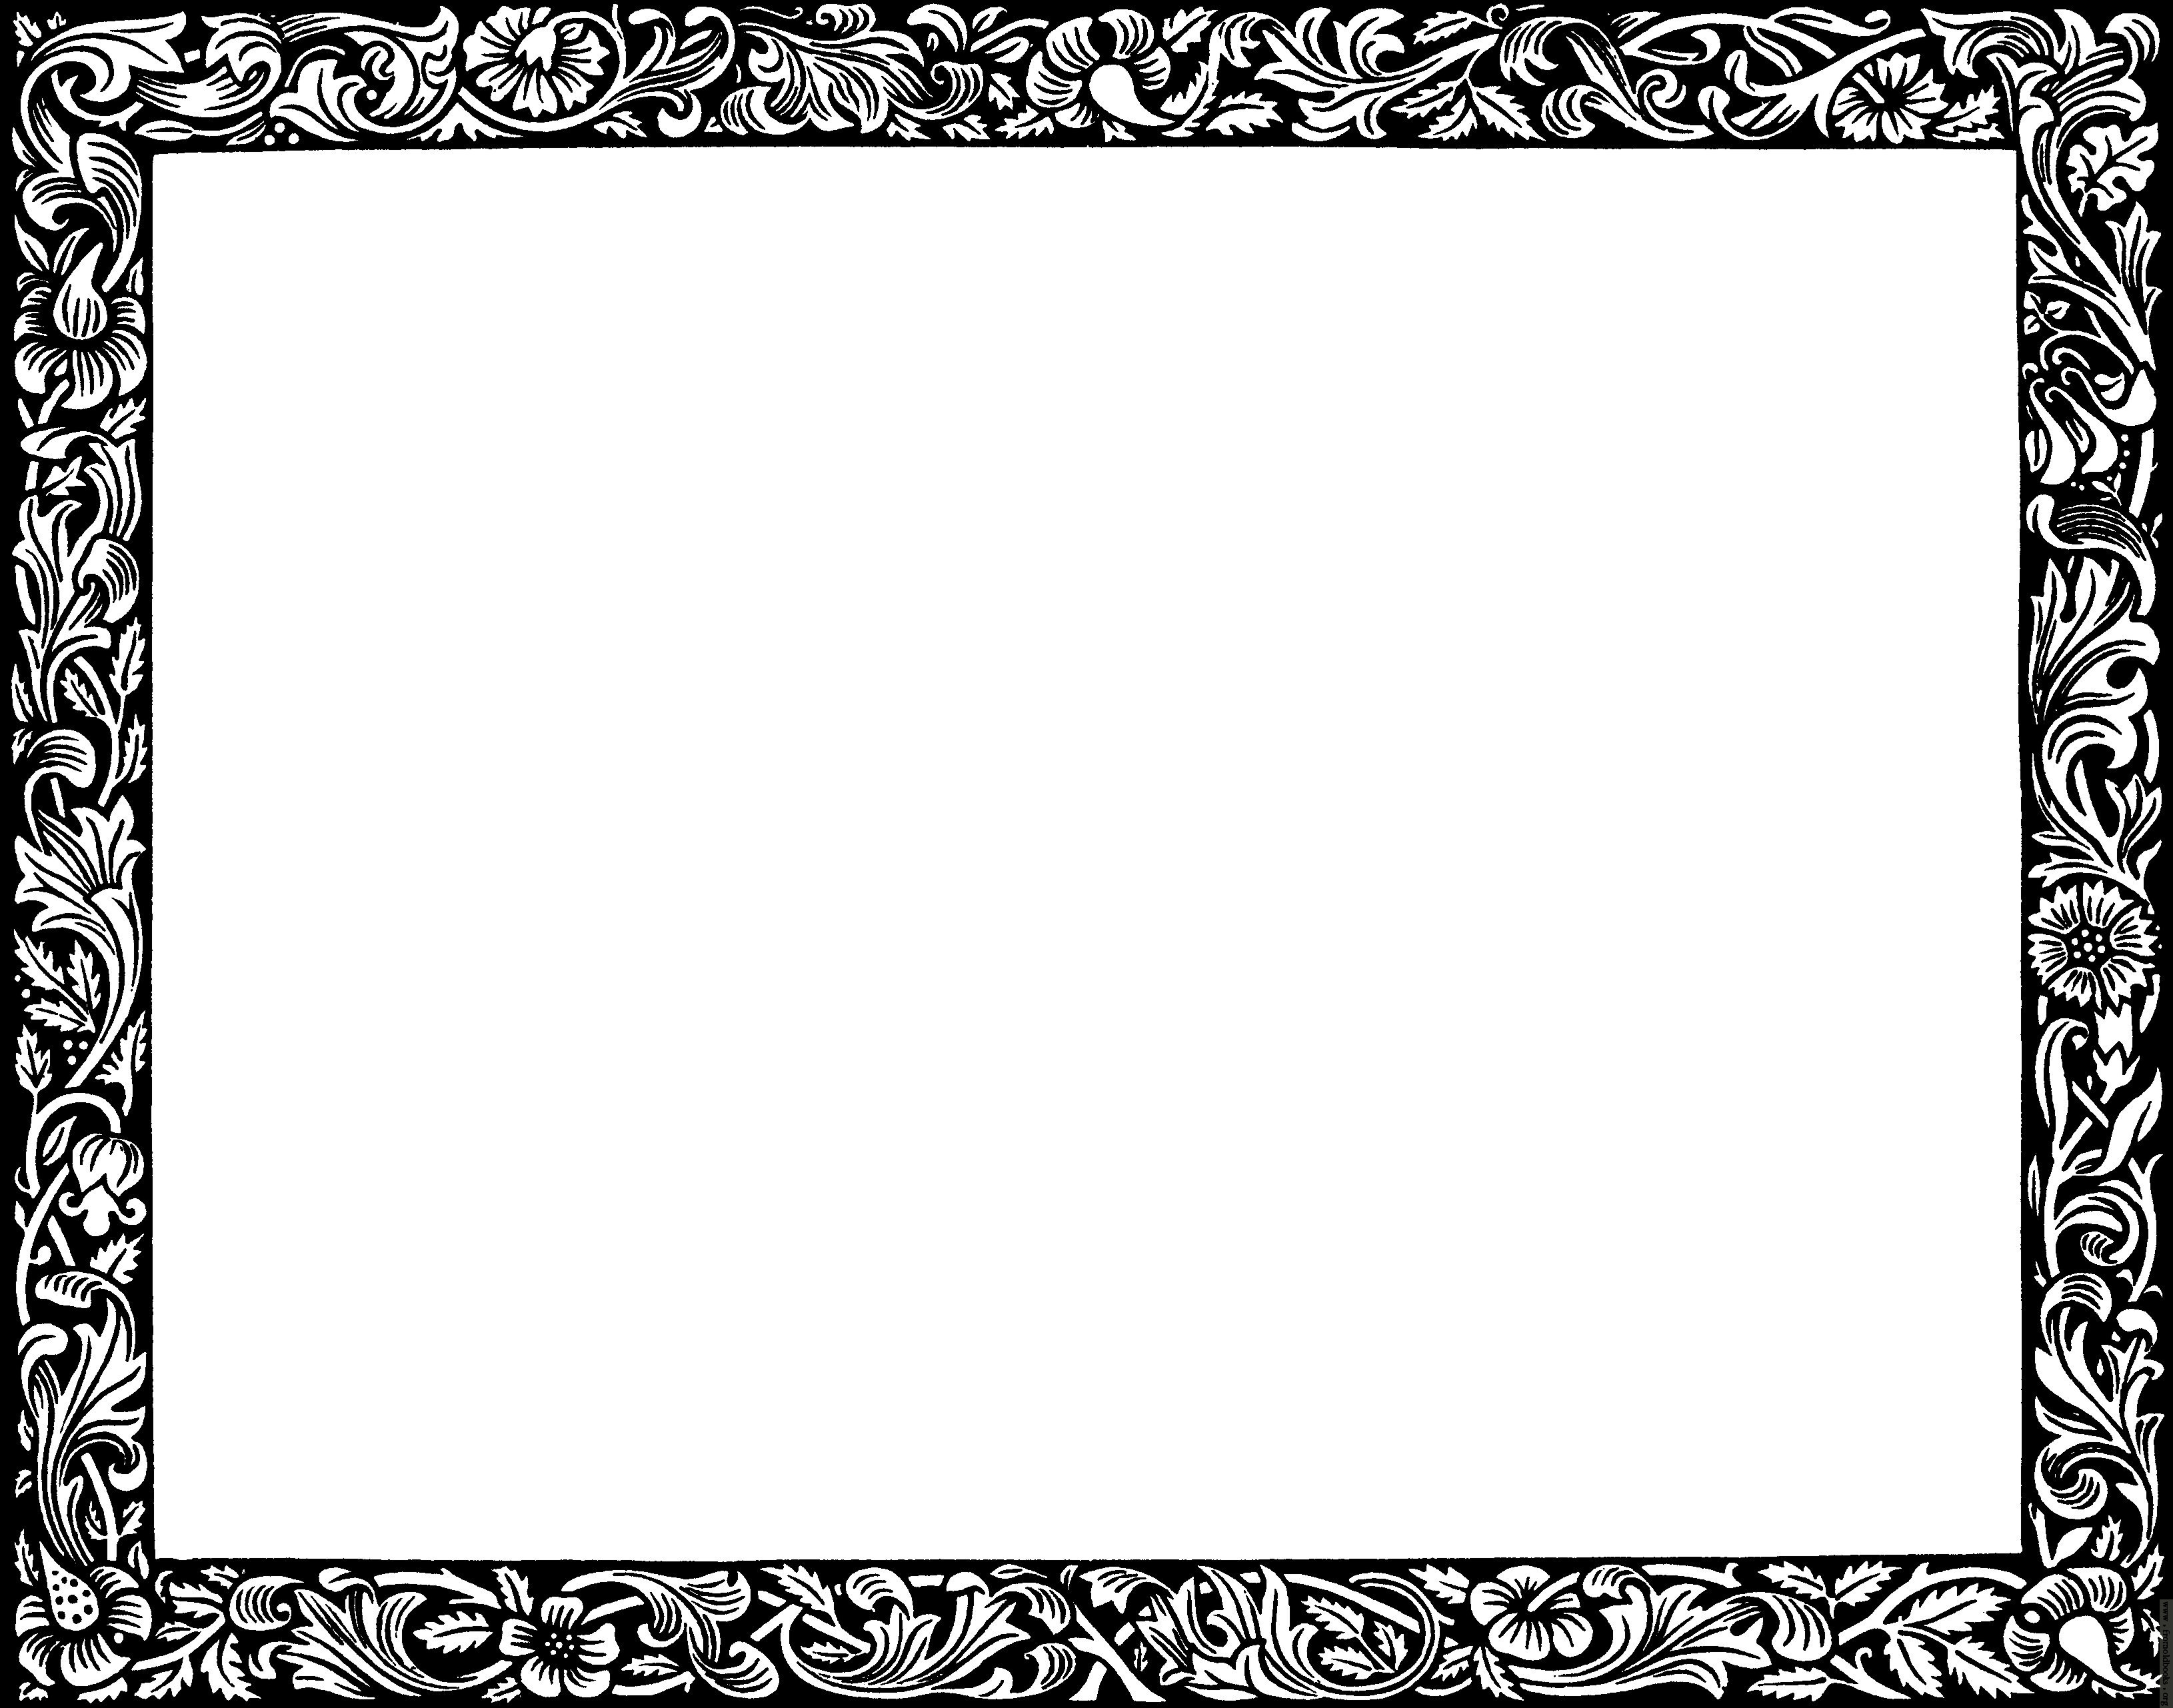 Book Page Border - ClipArt Best